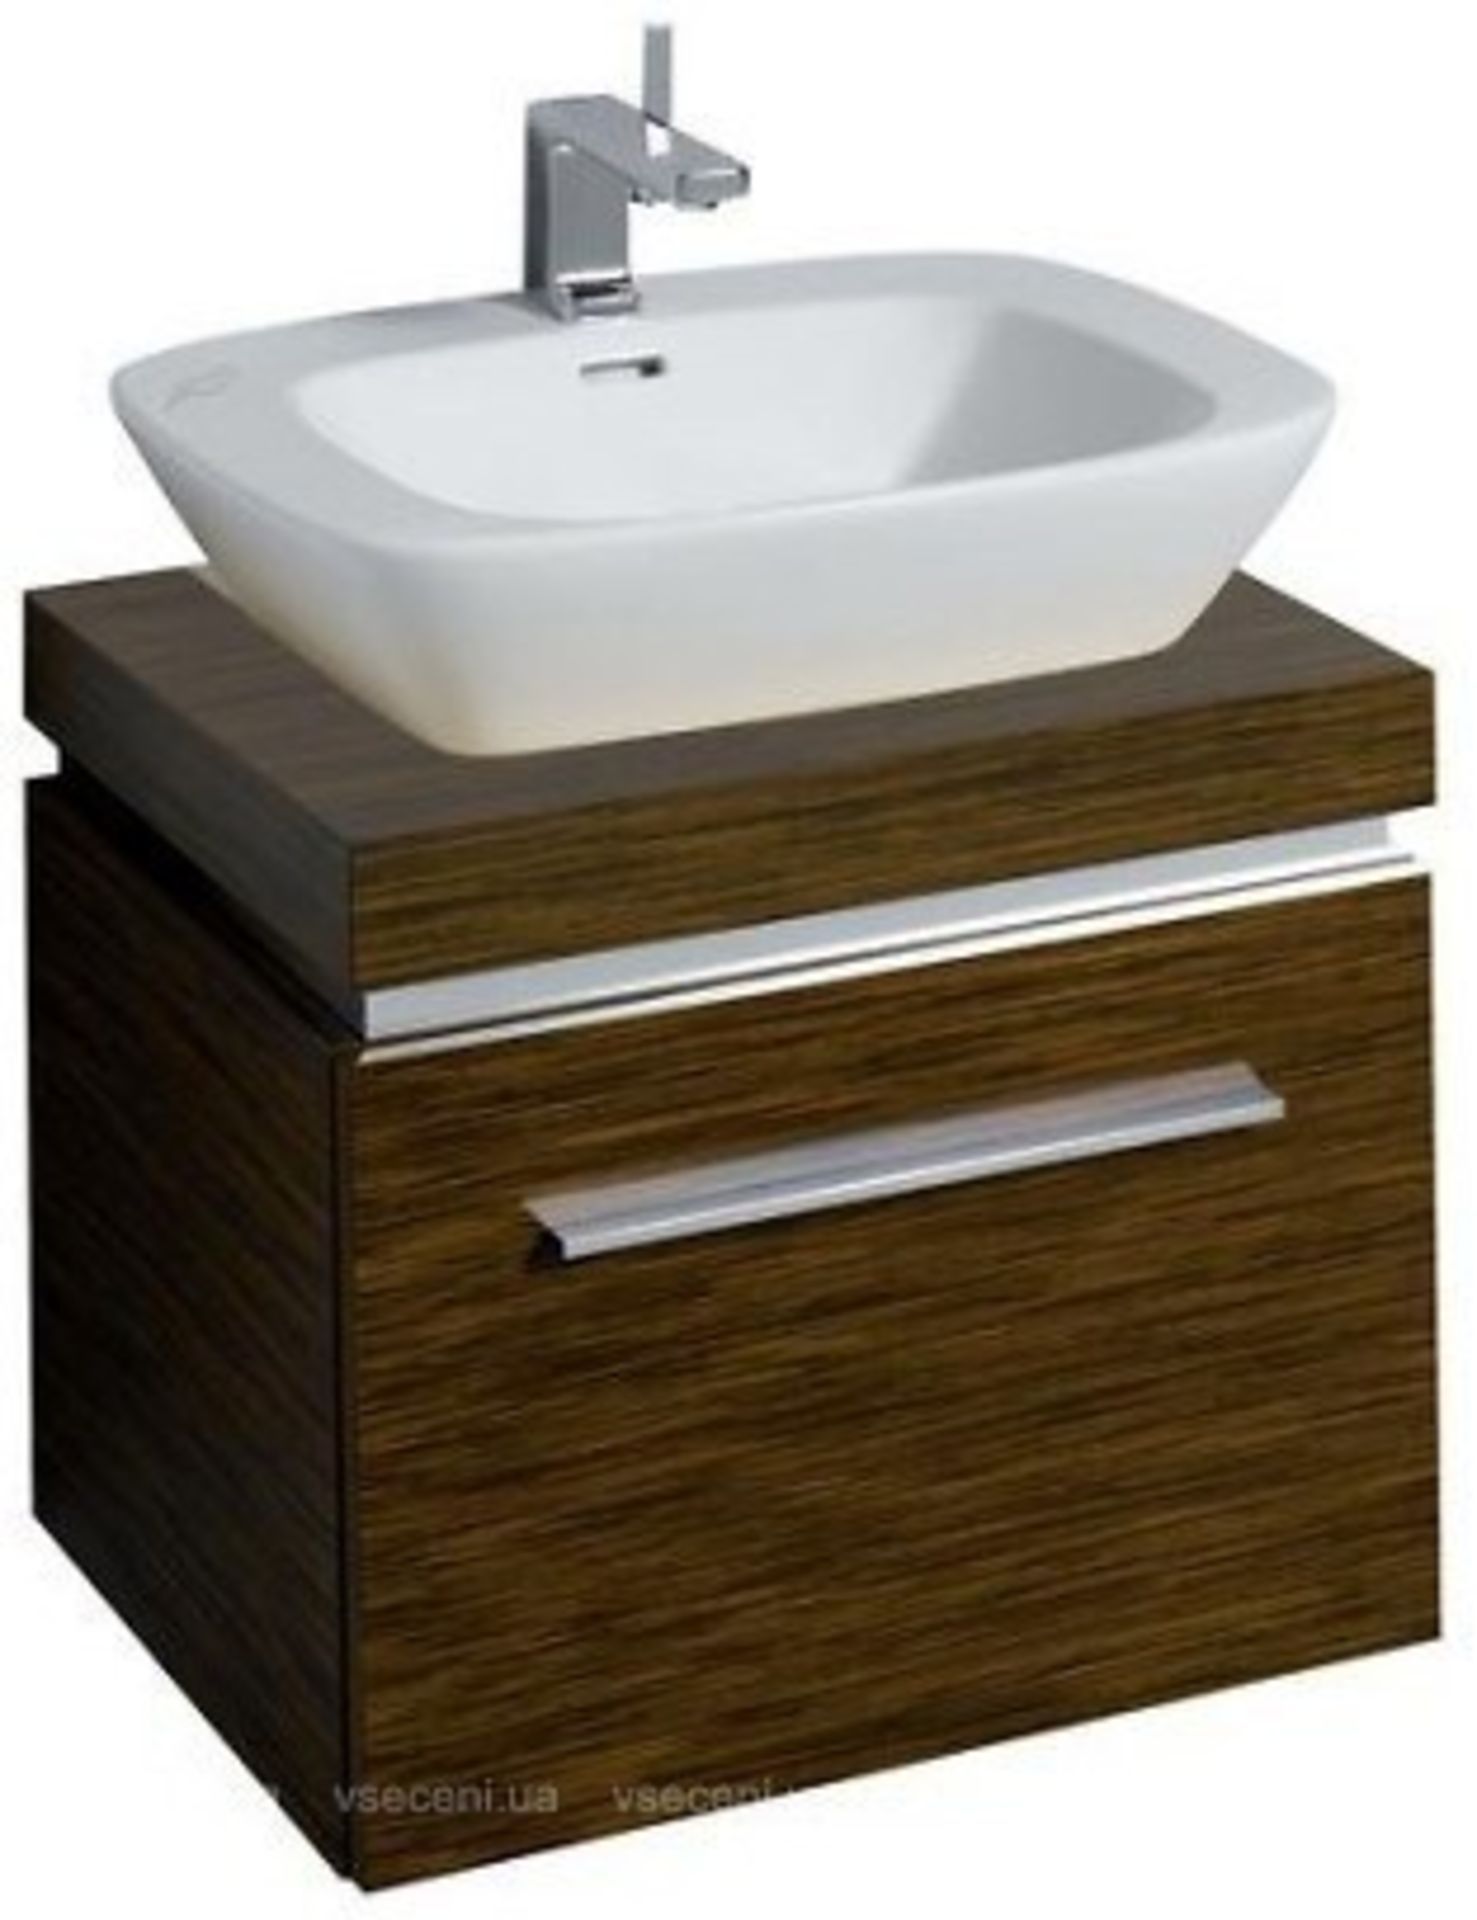 NEW & BOXED (A24) Keramag 600mm Walnut Vanity unit.RRP £818.99.Comes complete with basin. T...